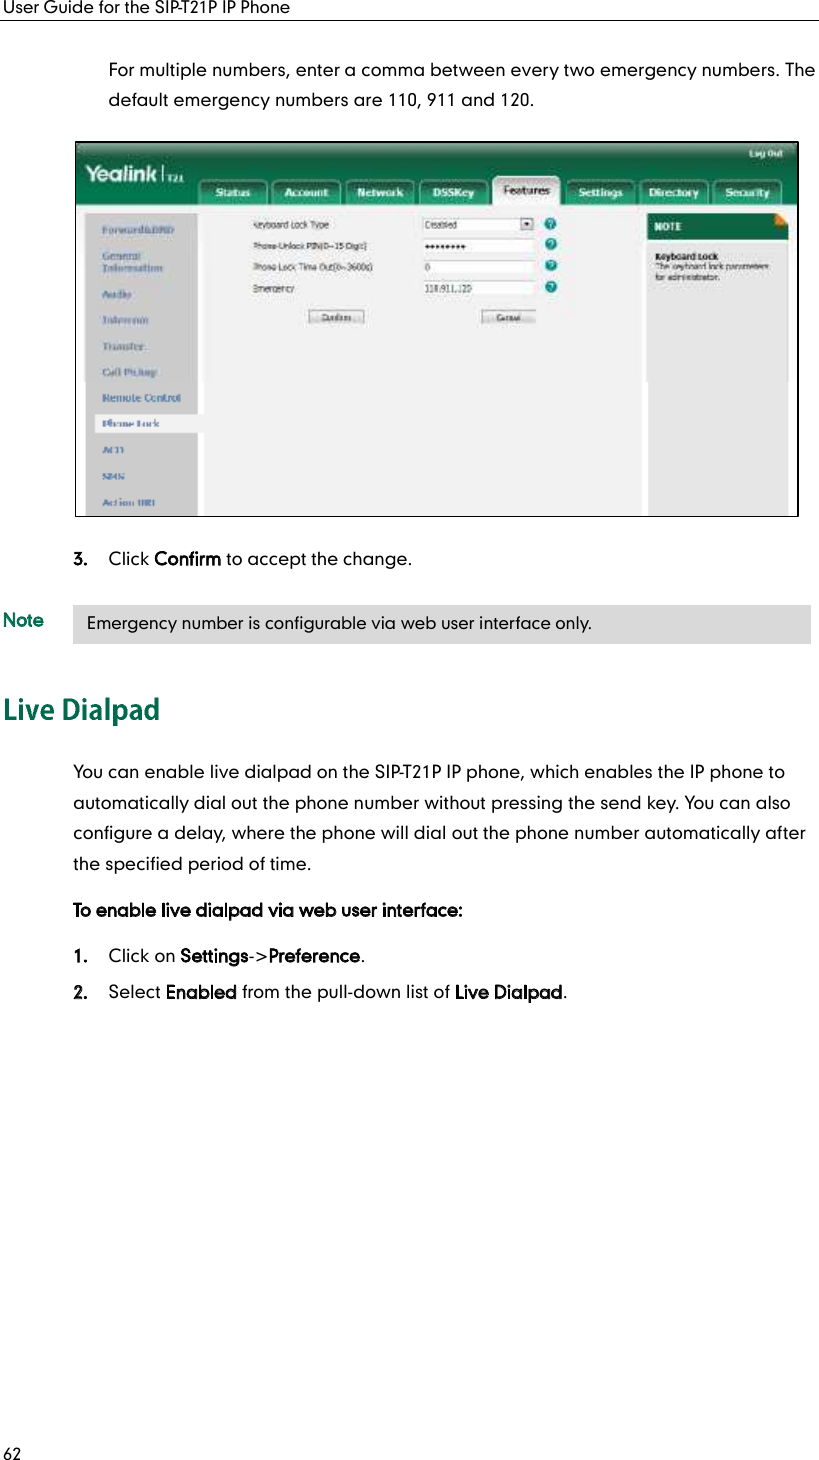 User Guide for the SIP-T21P IP Phone 62 For multiple numbers, enter a comma between every two emergency numbers. The default emergency numbers are 110, 911 and 120. 3. Click Confirm to accept the change. Note You can enable live dialpad on the SIP-T21P IP phone, which enables the IP phone to automatically dial out the phone number without pressing the send key. You can also configure a delay, where the phone will dial out the phone number automatically after the specified period of time. To enable live dialpad via web user interface: 1. Click on Settings-&gt;Preference. 2. Select Enabled from the pull-down list of Live Dialpad.    Emergency number is configurable via web user interface only. 